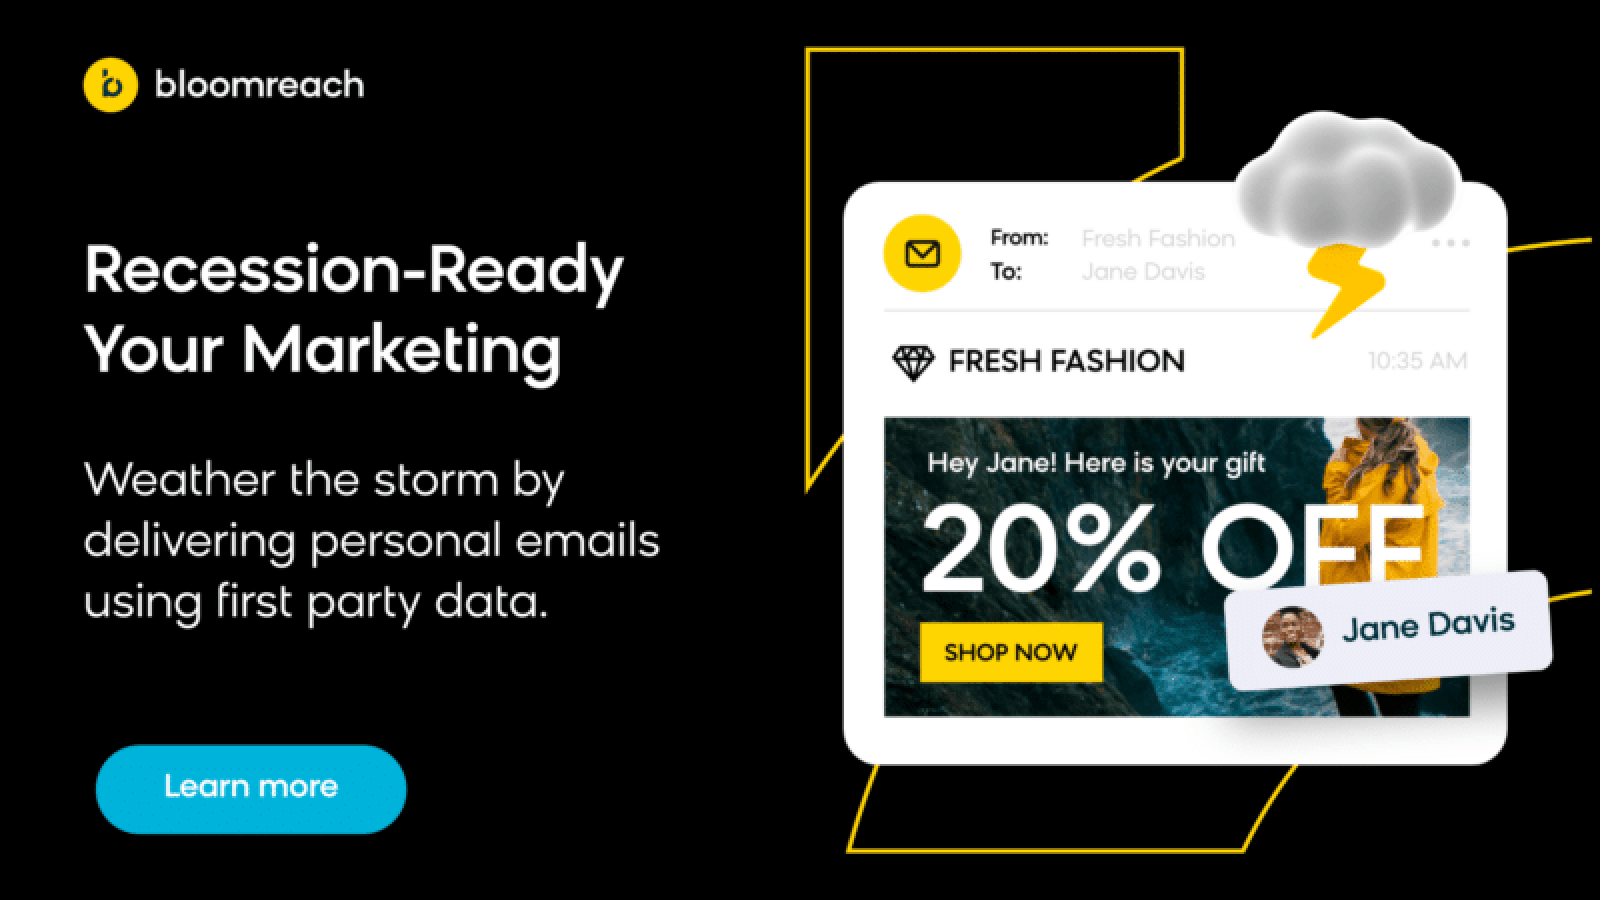 Email is key to marketing in an unpredictable economy by Bloomreach